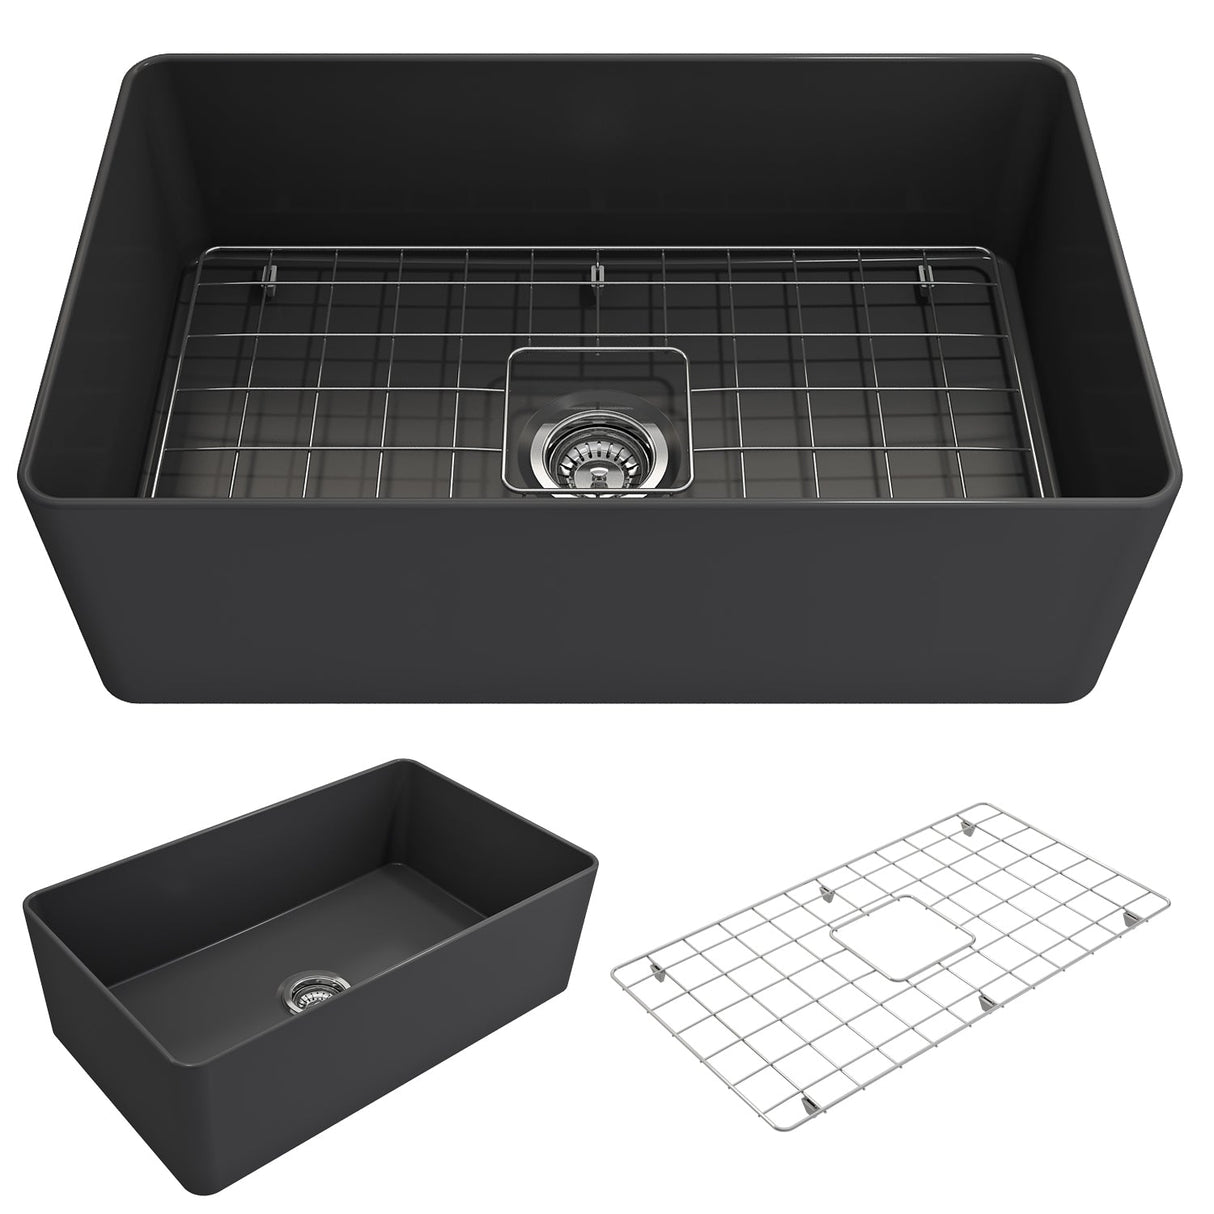 BOCCHI 1481-020-0120 Aderci Ultra-Slim Farmhouse Apron Front Fireclay 30 in. Single Bowl Kitchen Sink with Protective Bottom Grid and Strainer in Matte Dark Gray